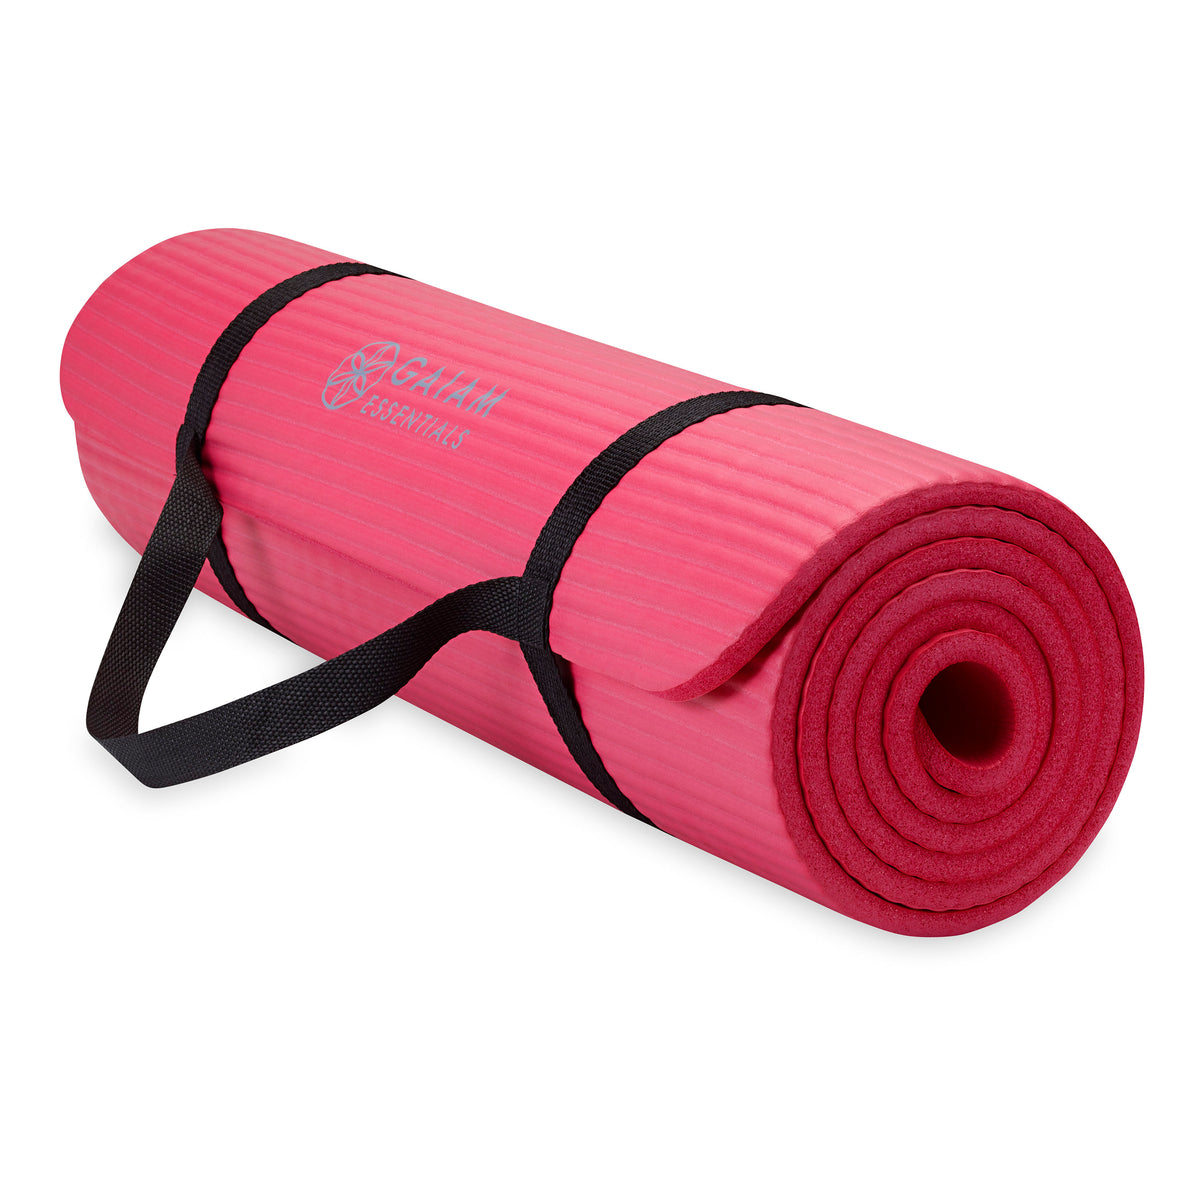 Urban Door Anti Skid Yoga Mat 6mm Exercise Mats for Gym Workout Fitness  multicolor Pink 6 mm Yoga Mat - Buy Urban Door Anti Skid Yoga Mat 6mm  Exercise Mats for Gym